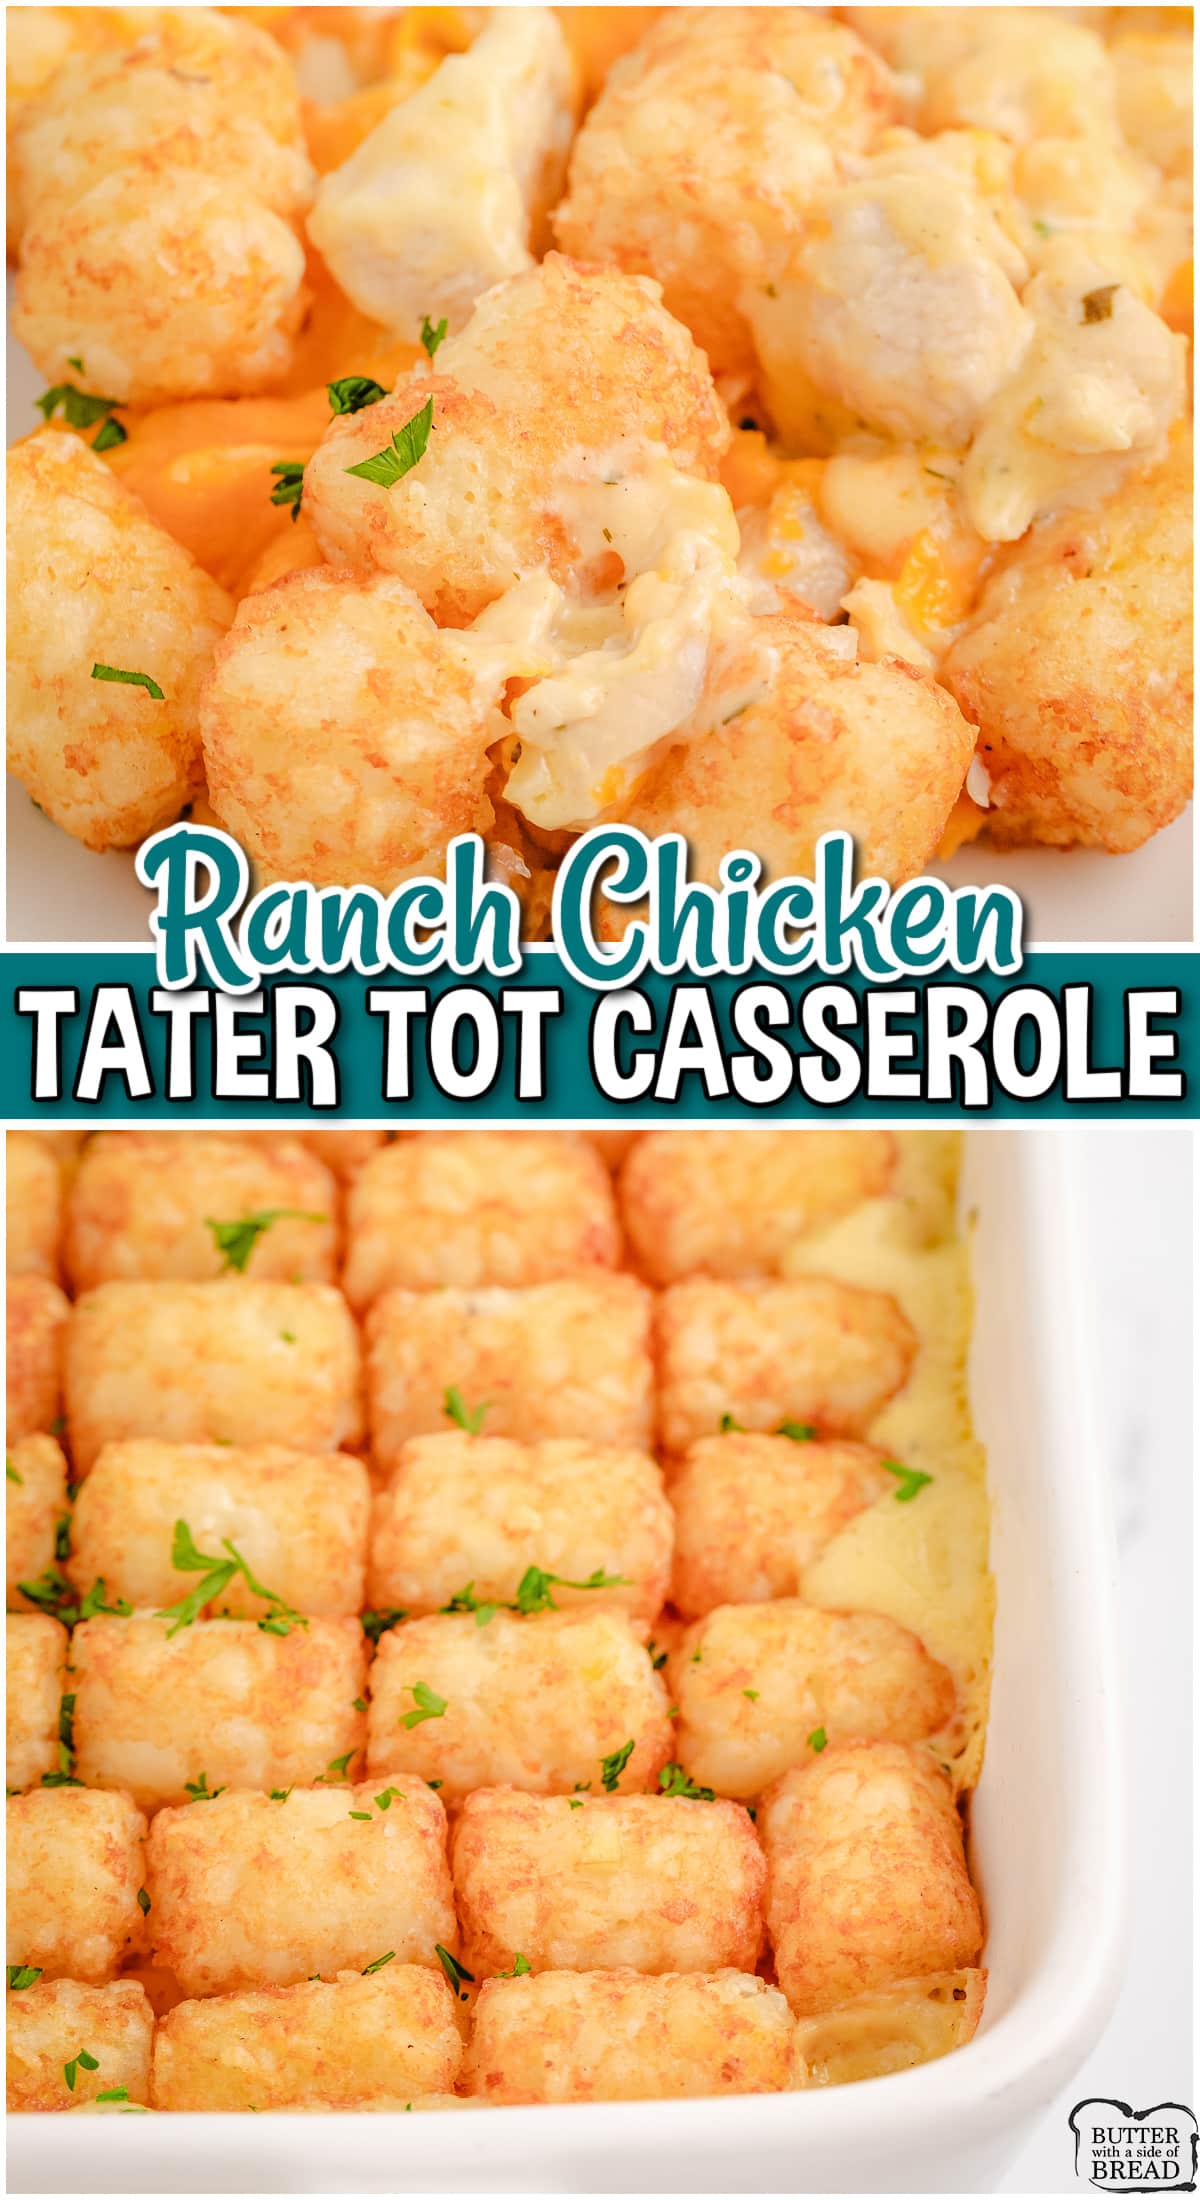 Ranch Chicken Tater Tot Casserole is made with crispy tater tots, tender chicken, & zesty ranch seasoning for a cheesy, flavorful dinner everyone loves!